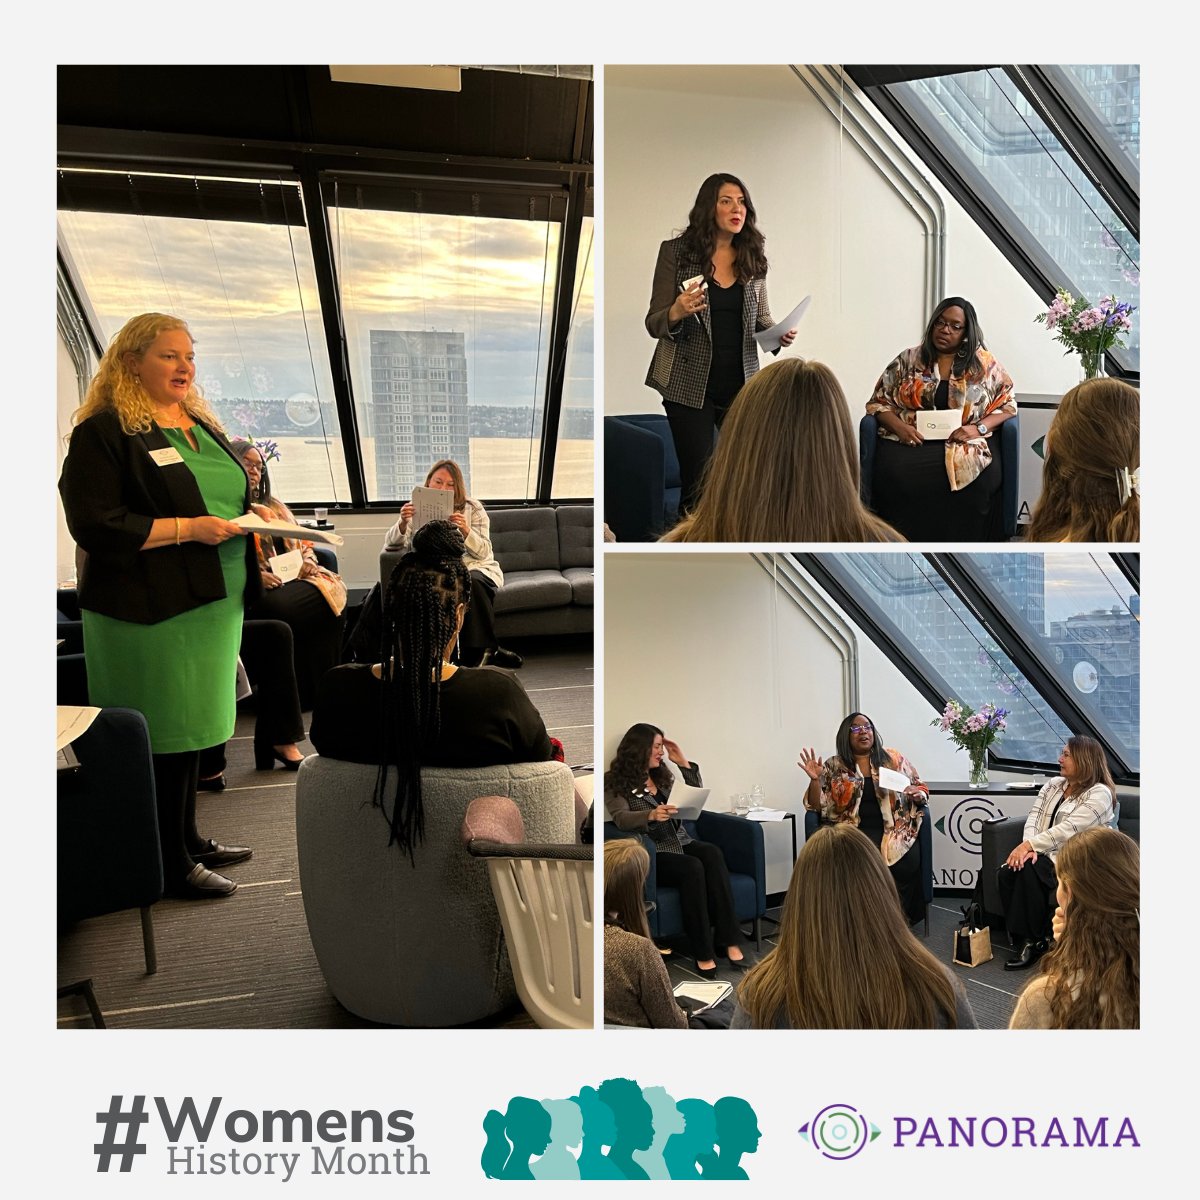 Last night, Panorama was honored to host @VoteRunLead for a conversation about the importance of electing women at every level. Thank you @erinvilardi and @aliciainedmonds for sharing their experiences and efforts in advancing gender parity in U.S. politics. #WomensHistoryMonth